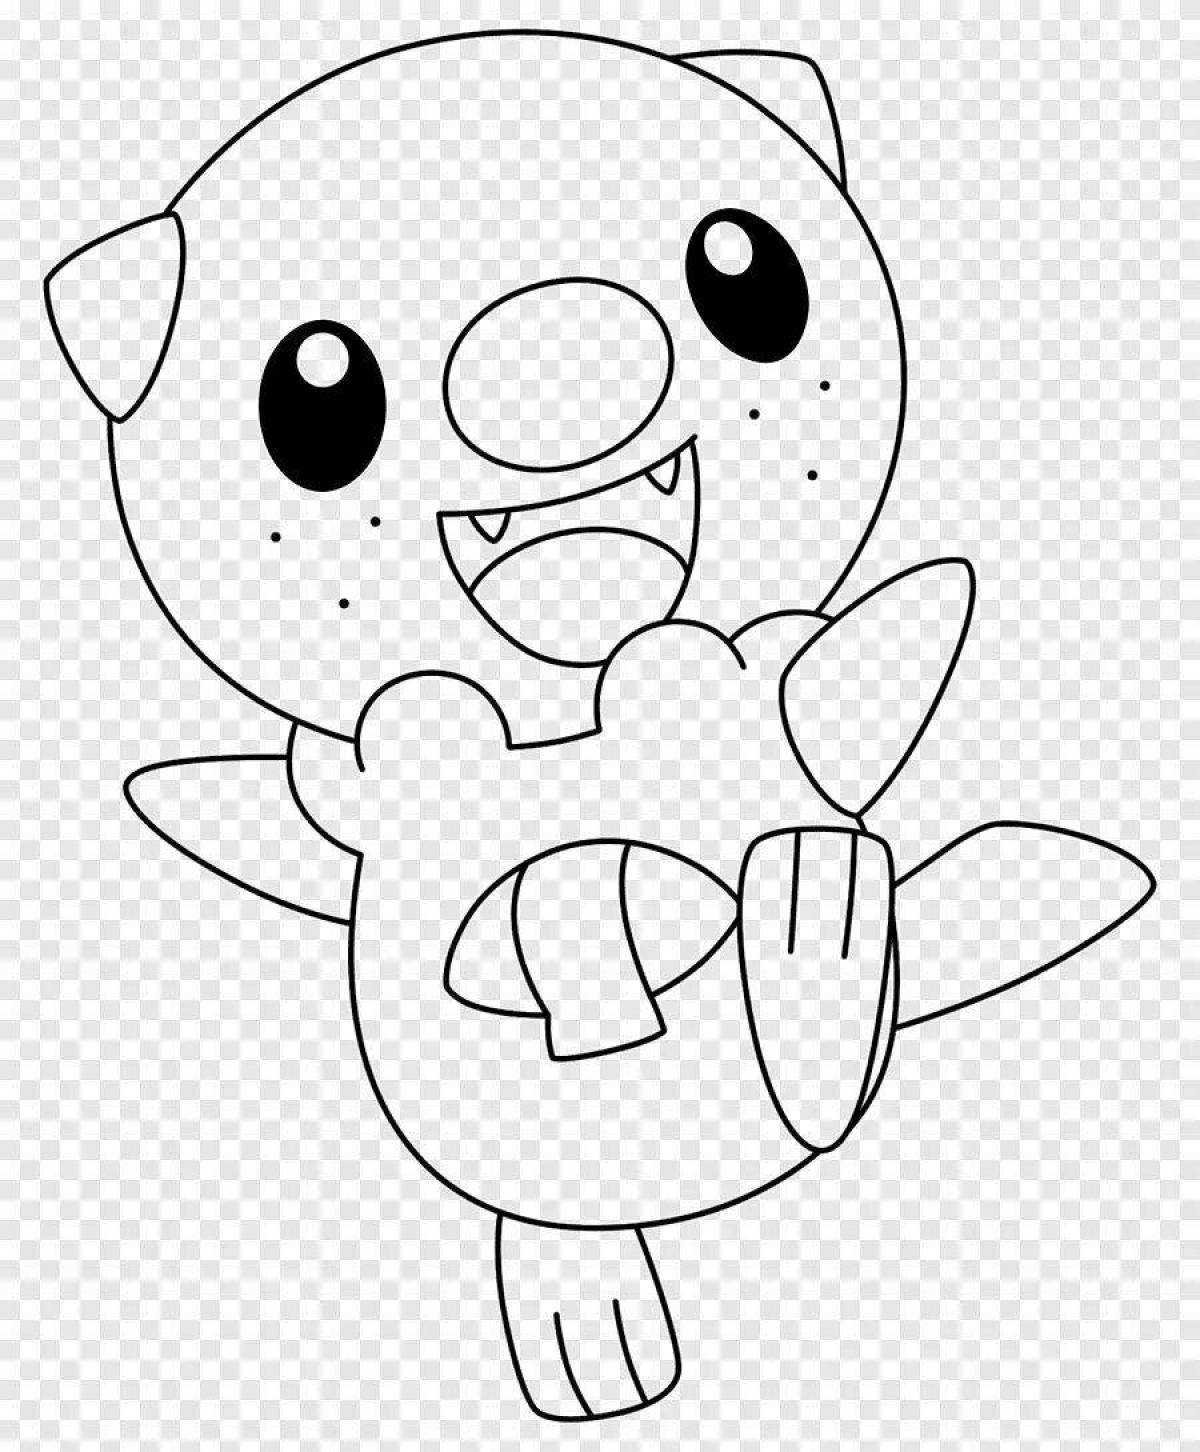 Lovely piplap pokemon coloring page